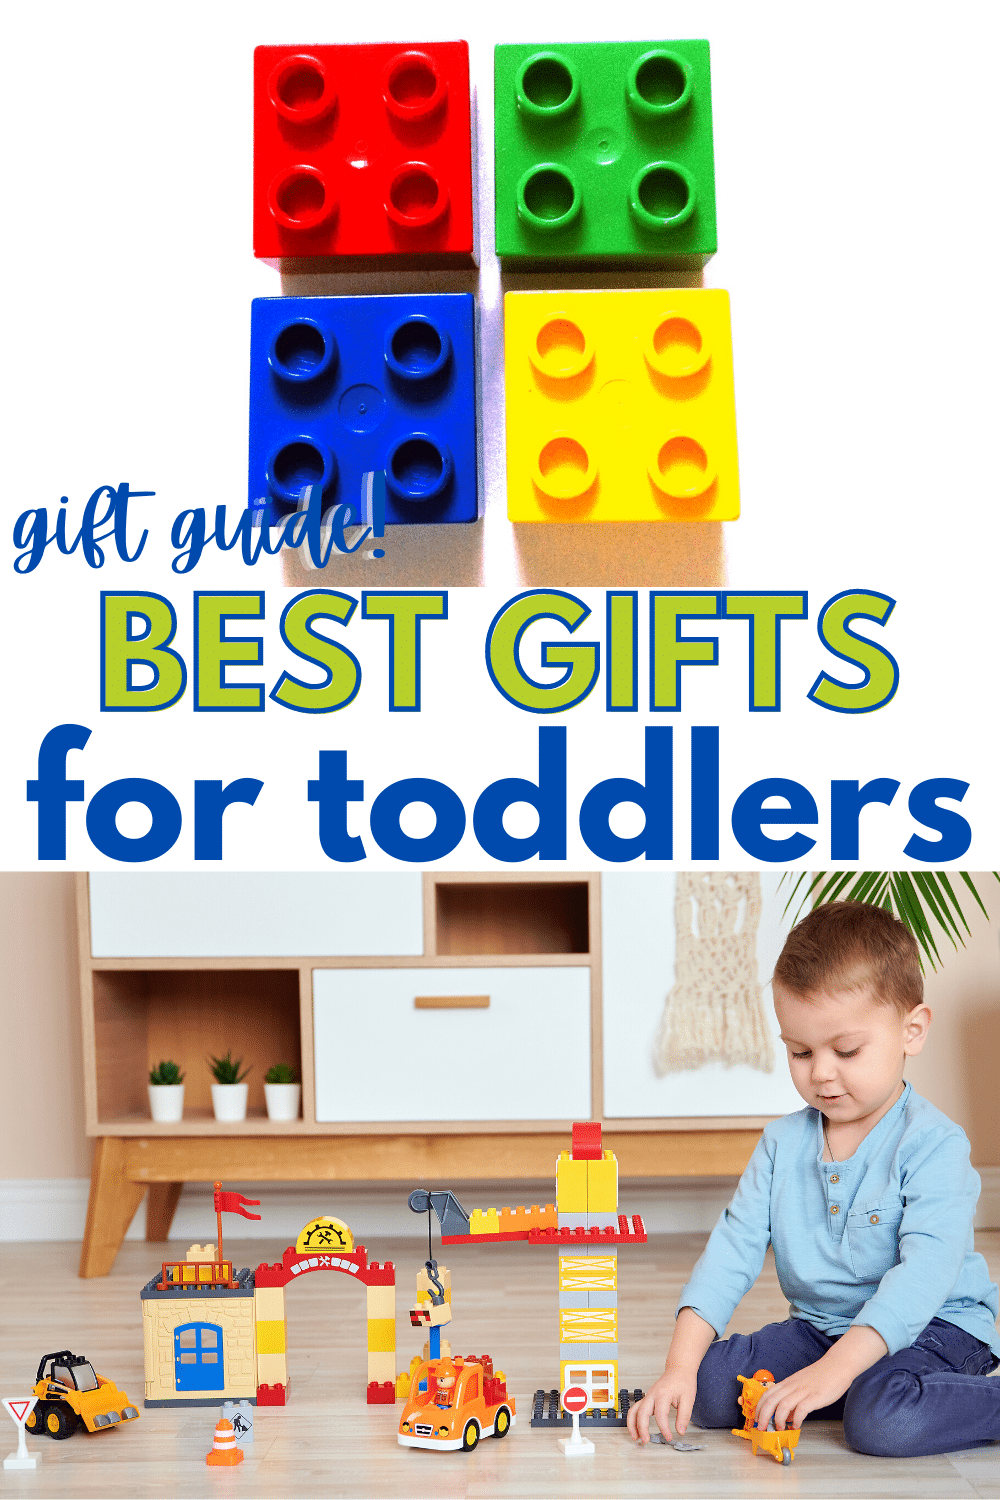 Toddlers are fun to shop for because 2 to 3-year old kids are so full of enthusiasm and wonder. Here's a list of the best gifts for toddlers. #giftguide #giftideas #toddlers #forkids via @wondermomwannab